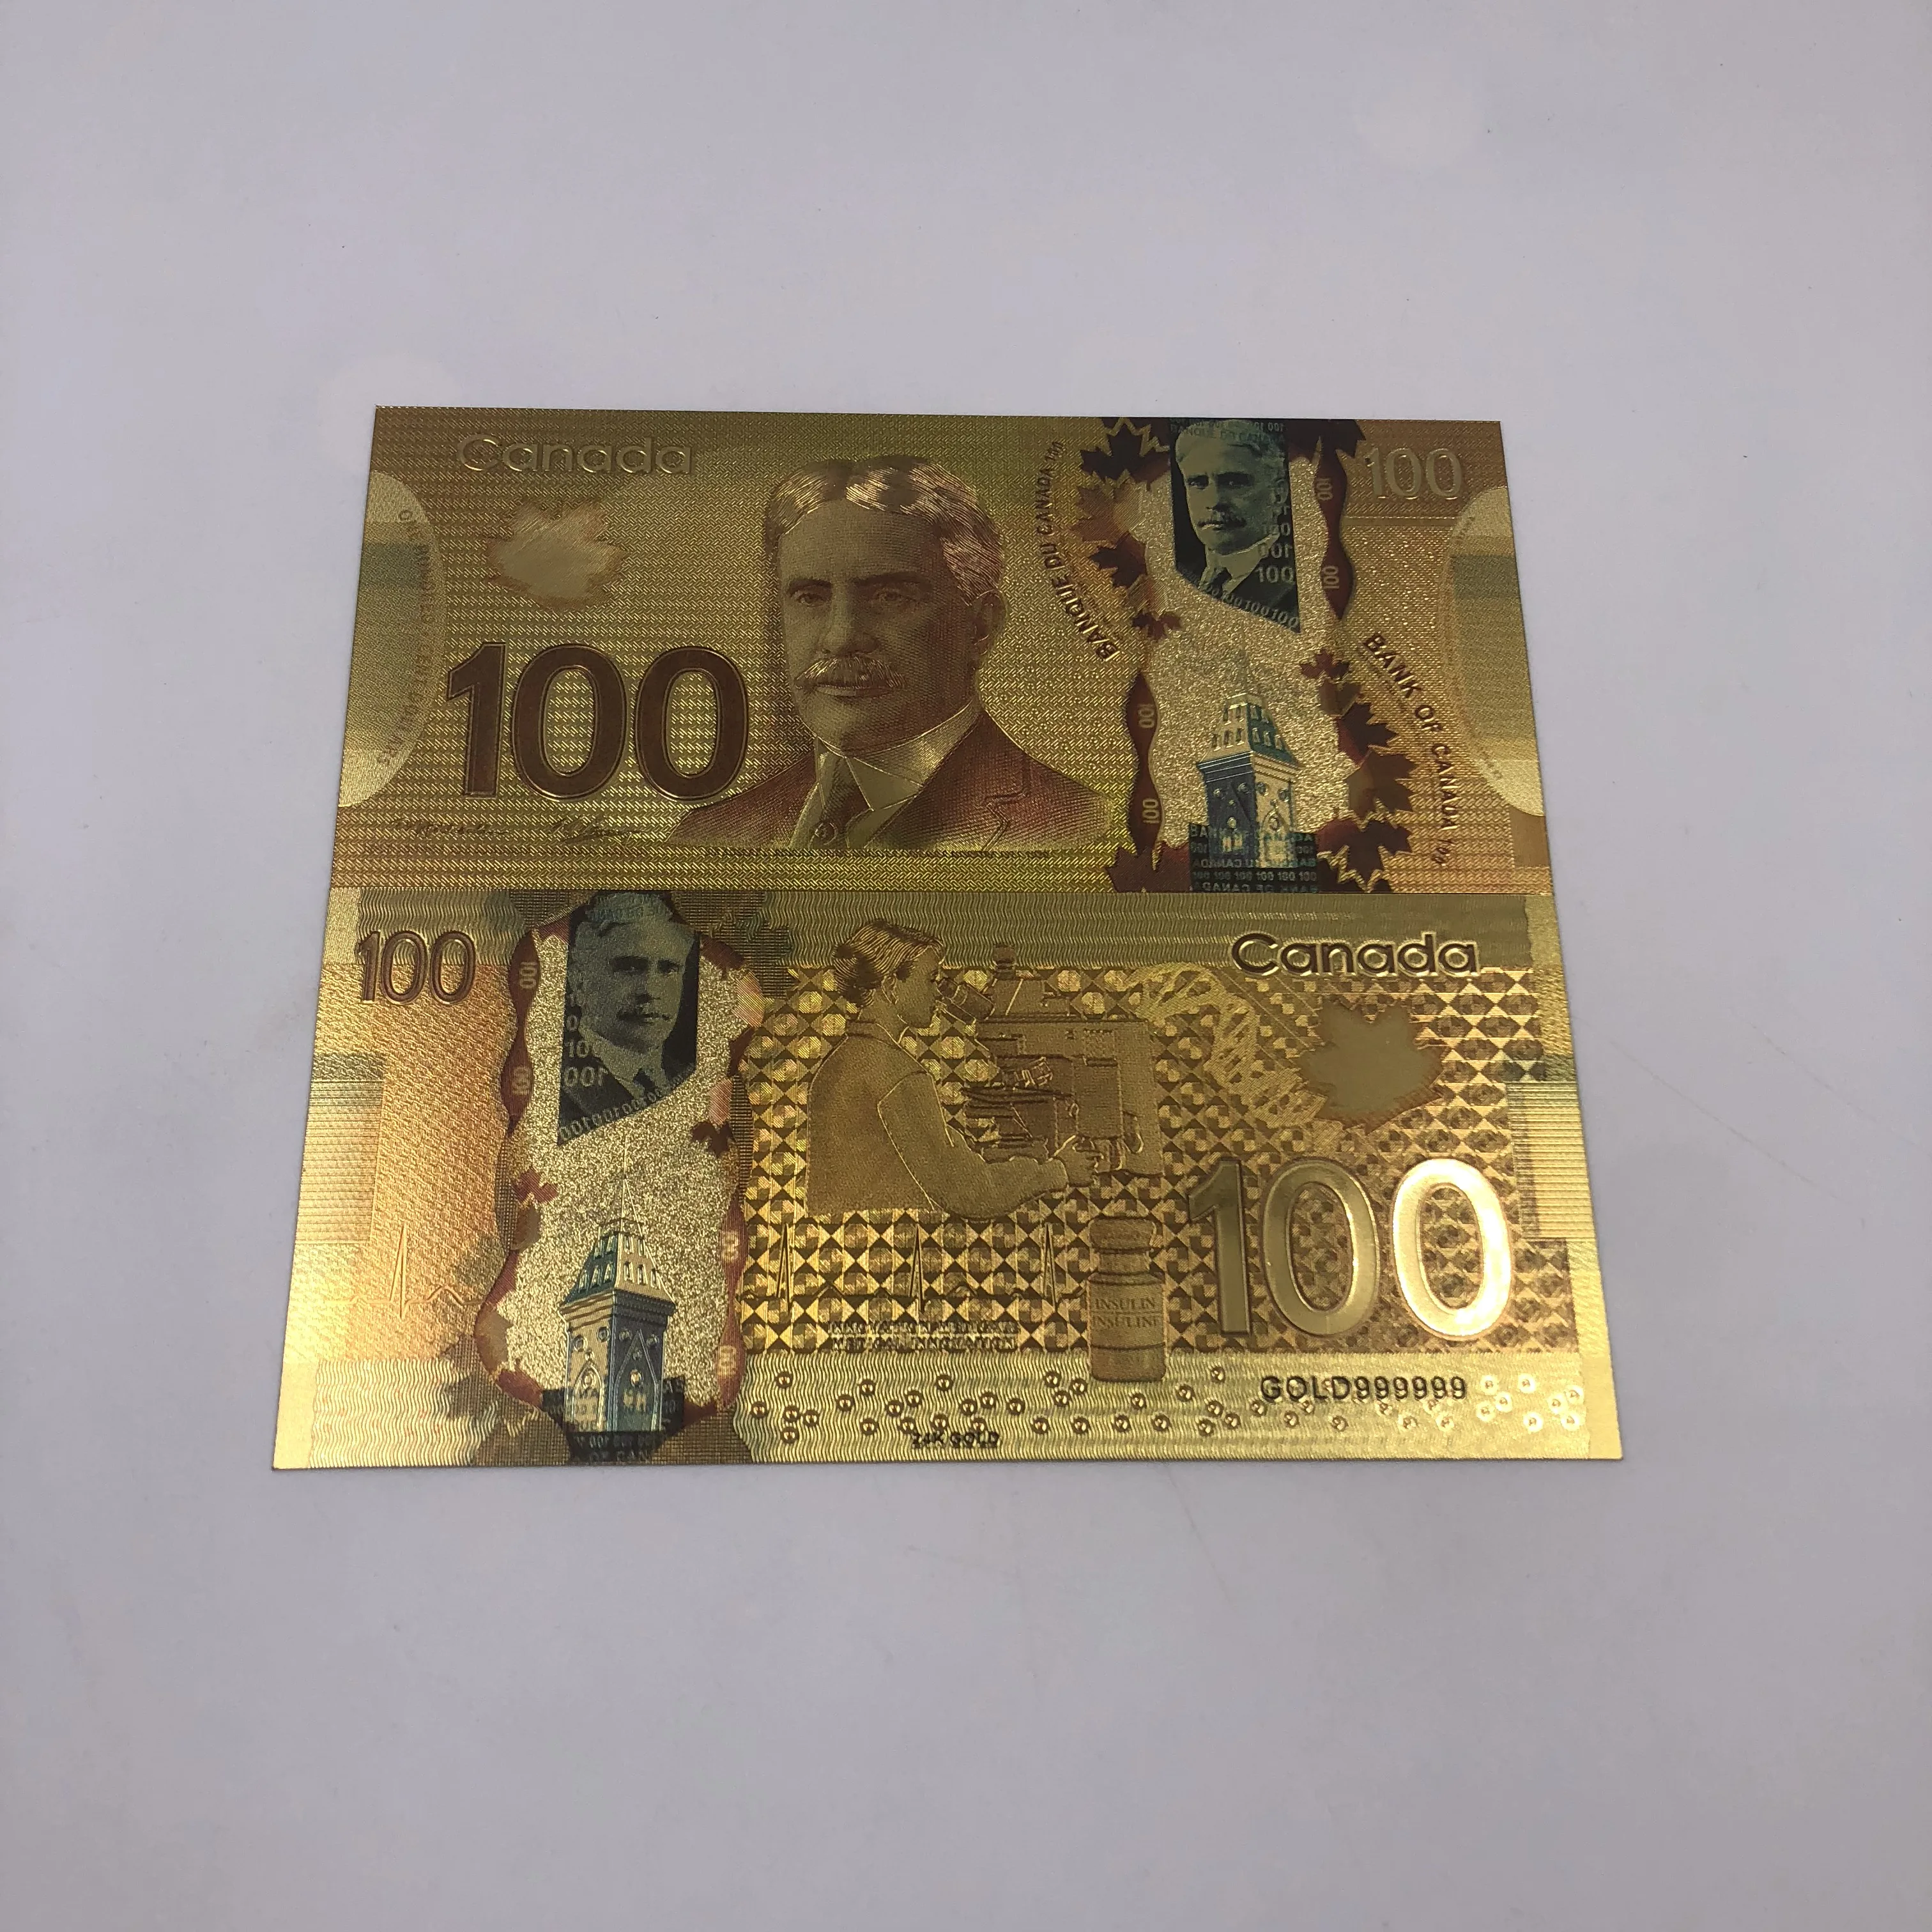 

Colored Canadian 100 dollar money collection CAD 100 gold foil plastic Canada banknote